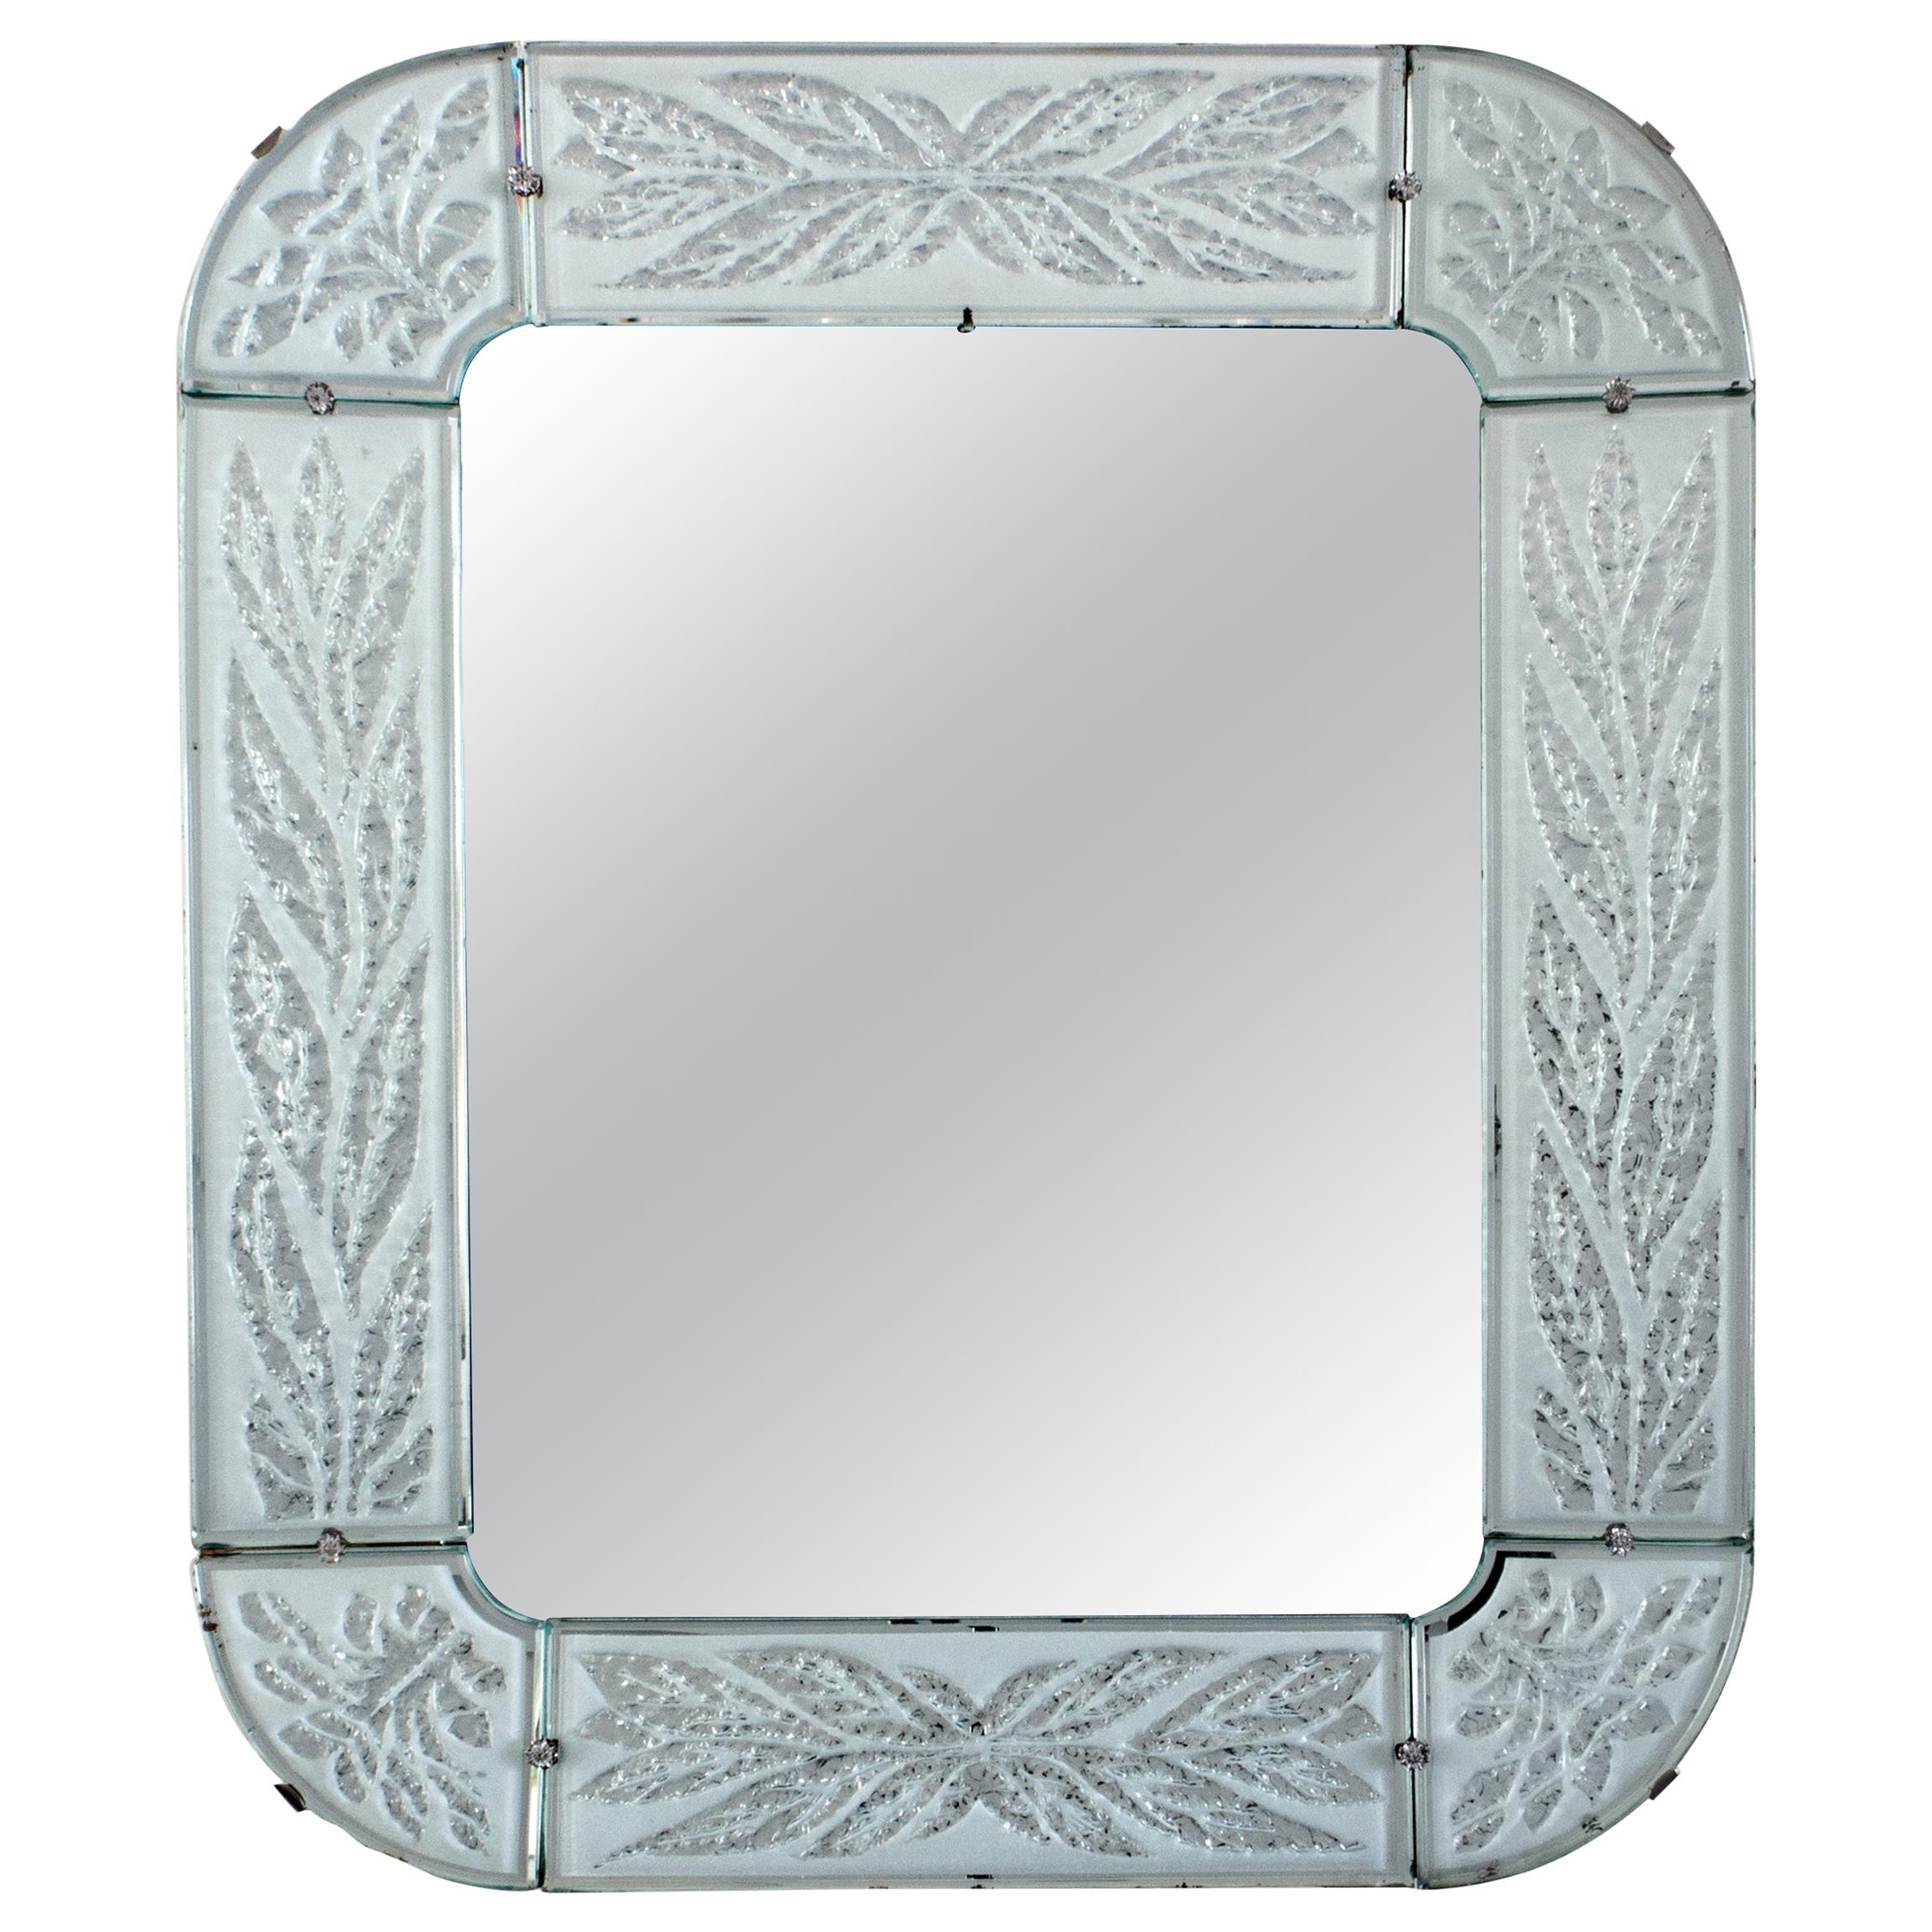 Radiant Mid-20th Century Swedish Chiseled and Frosted Glass-Framed Mirror